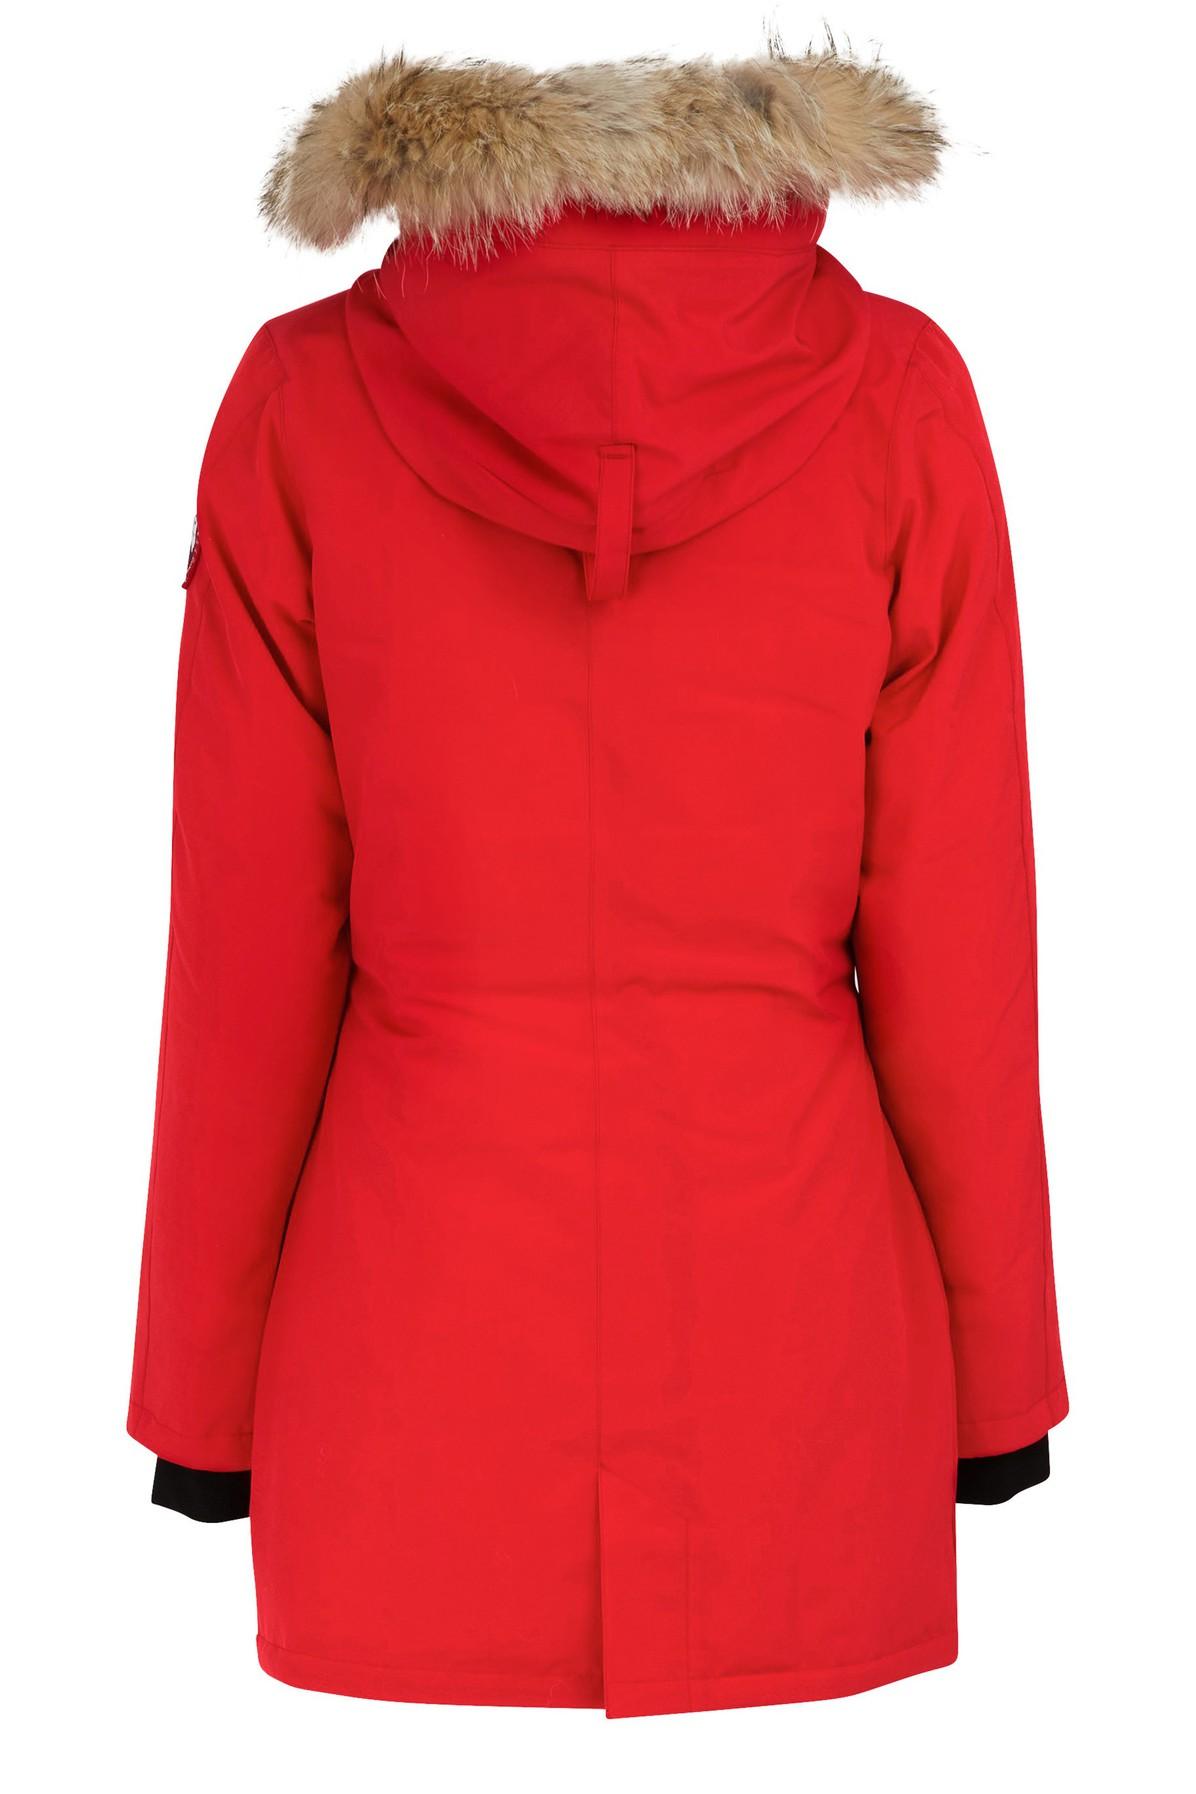 Canada Goose Goose Victoria Parka in Red | Lyst